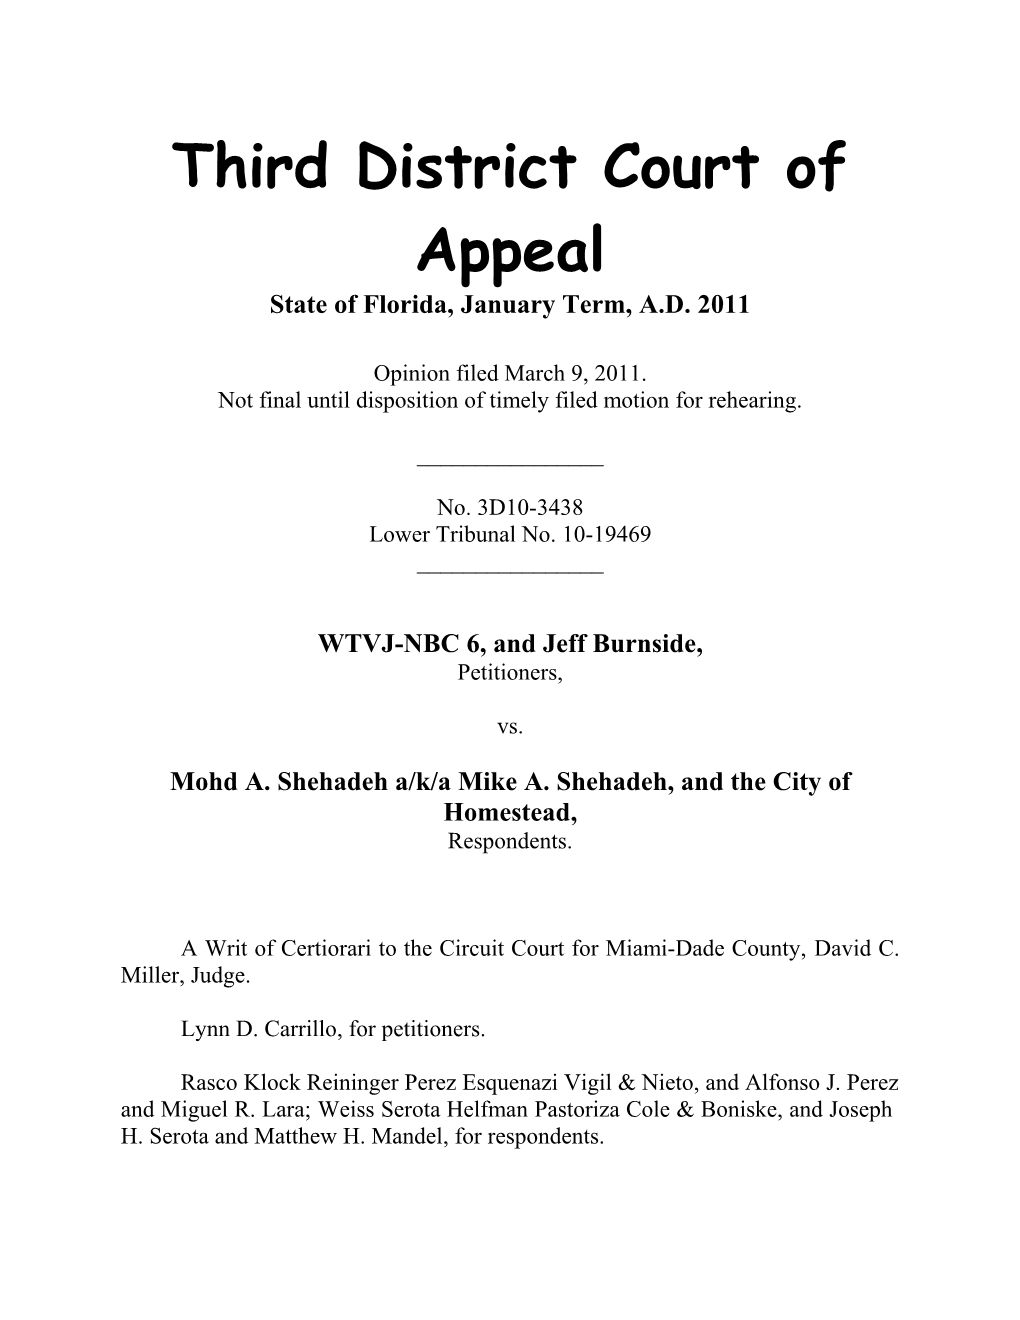 Third District Court of Appeal s2